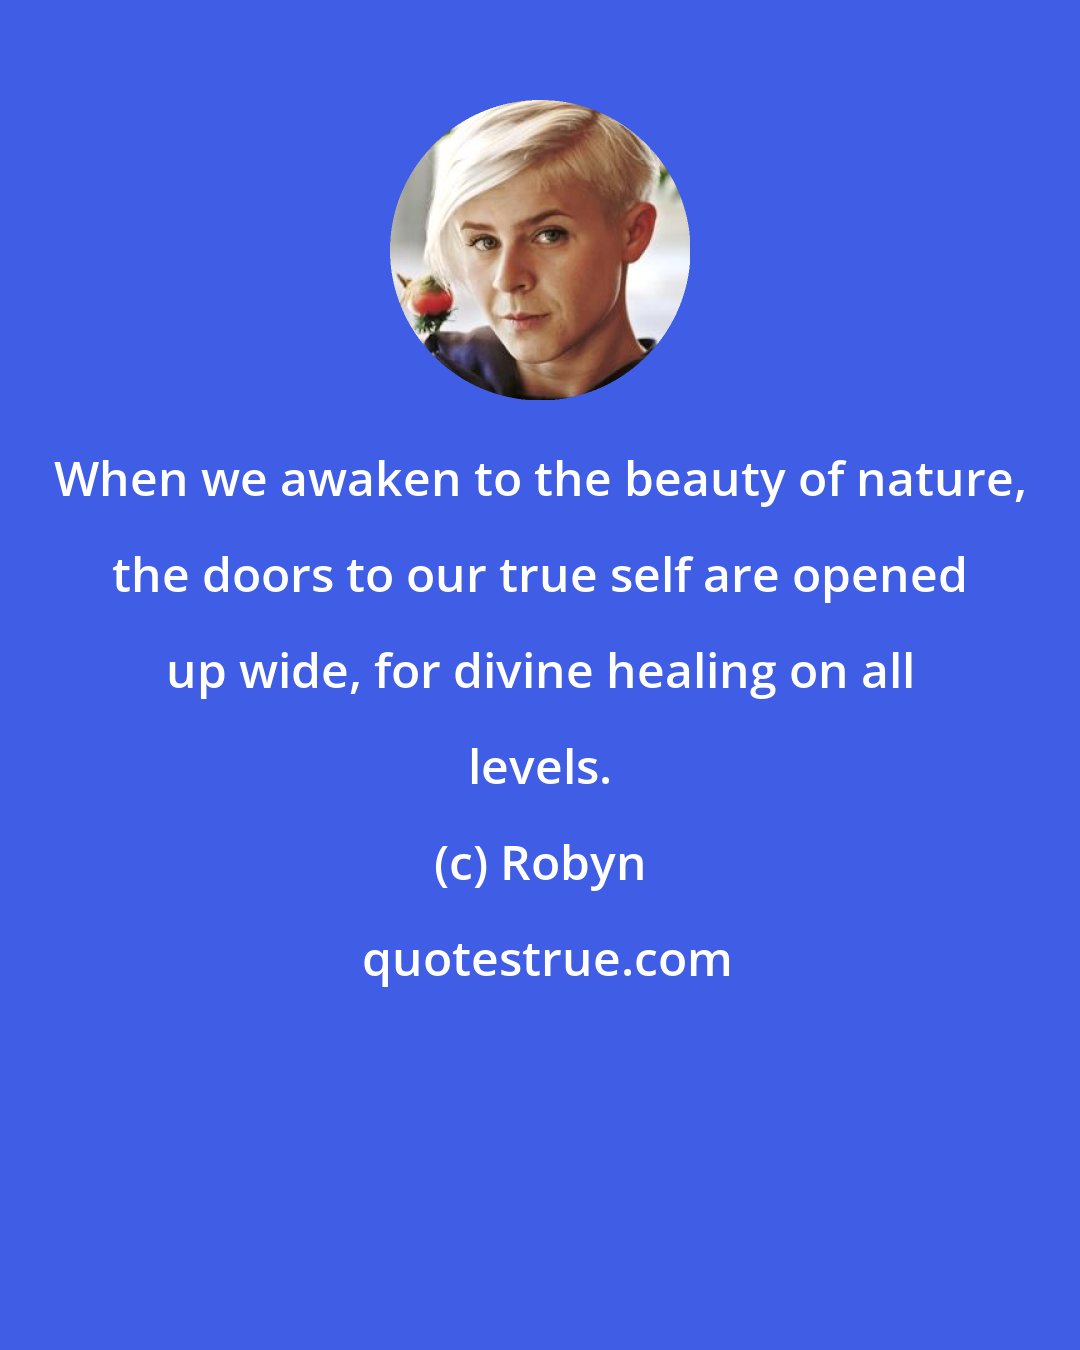 Robyn: When we awaken to the beauty of nature, the doors to our true self are opened up wide, for divine healing on all levels.